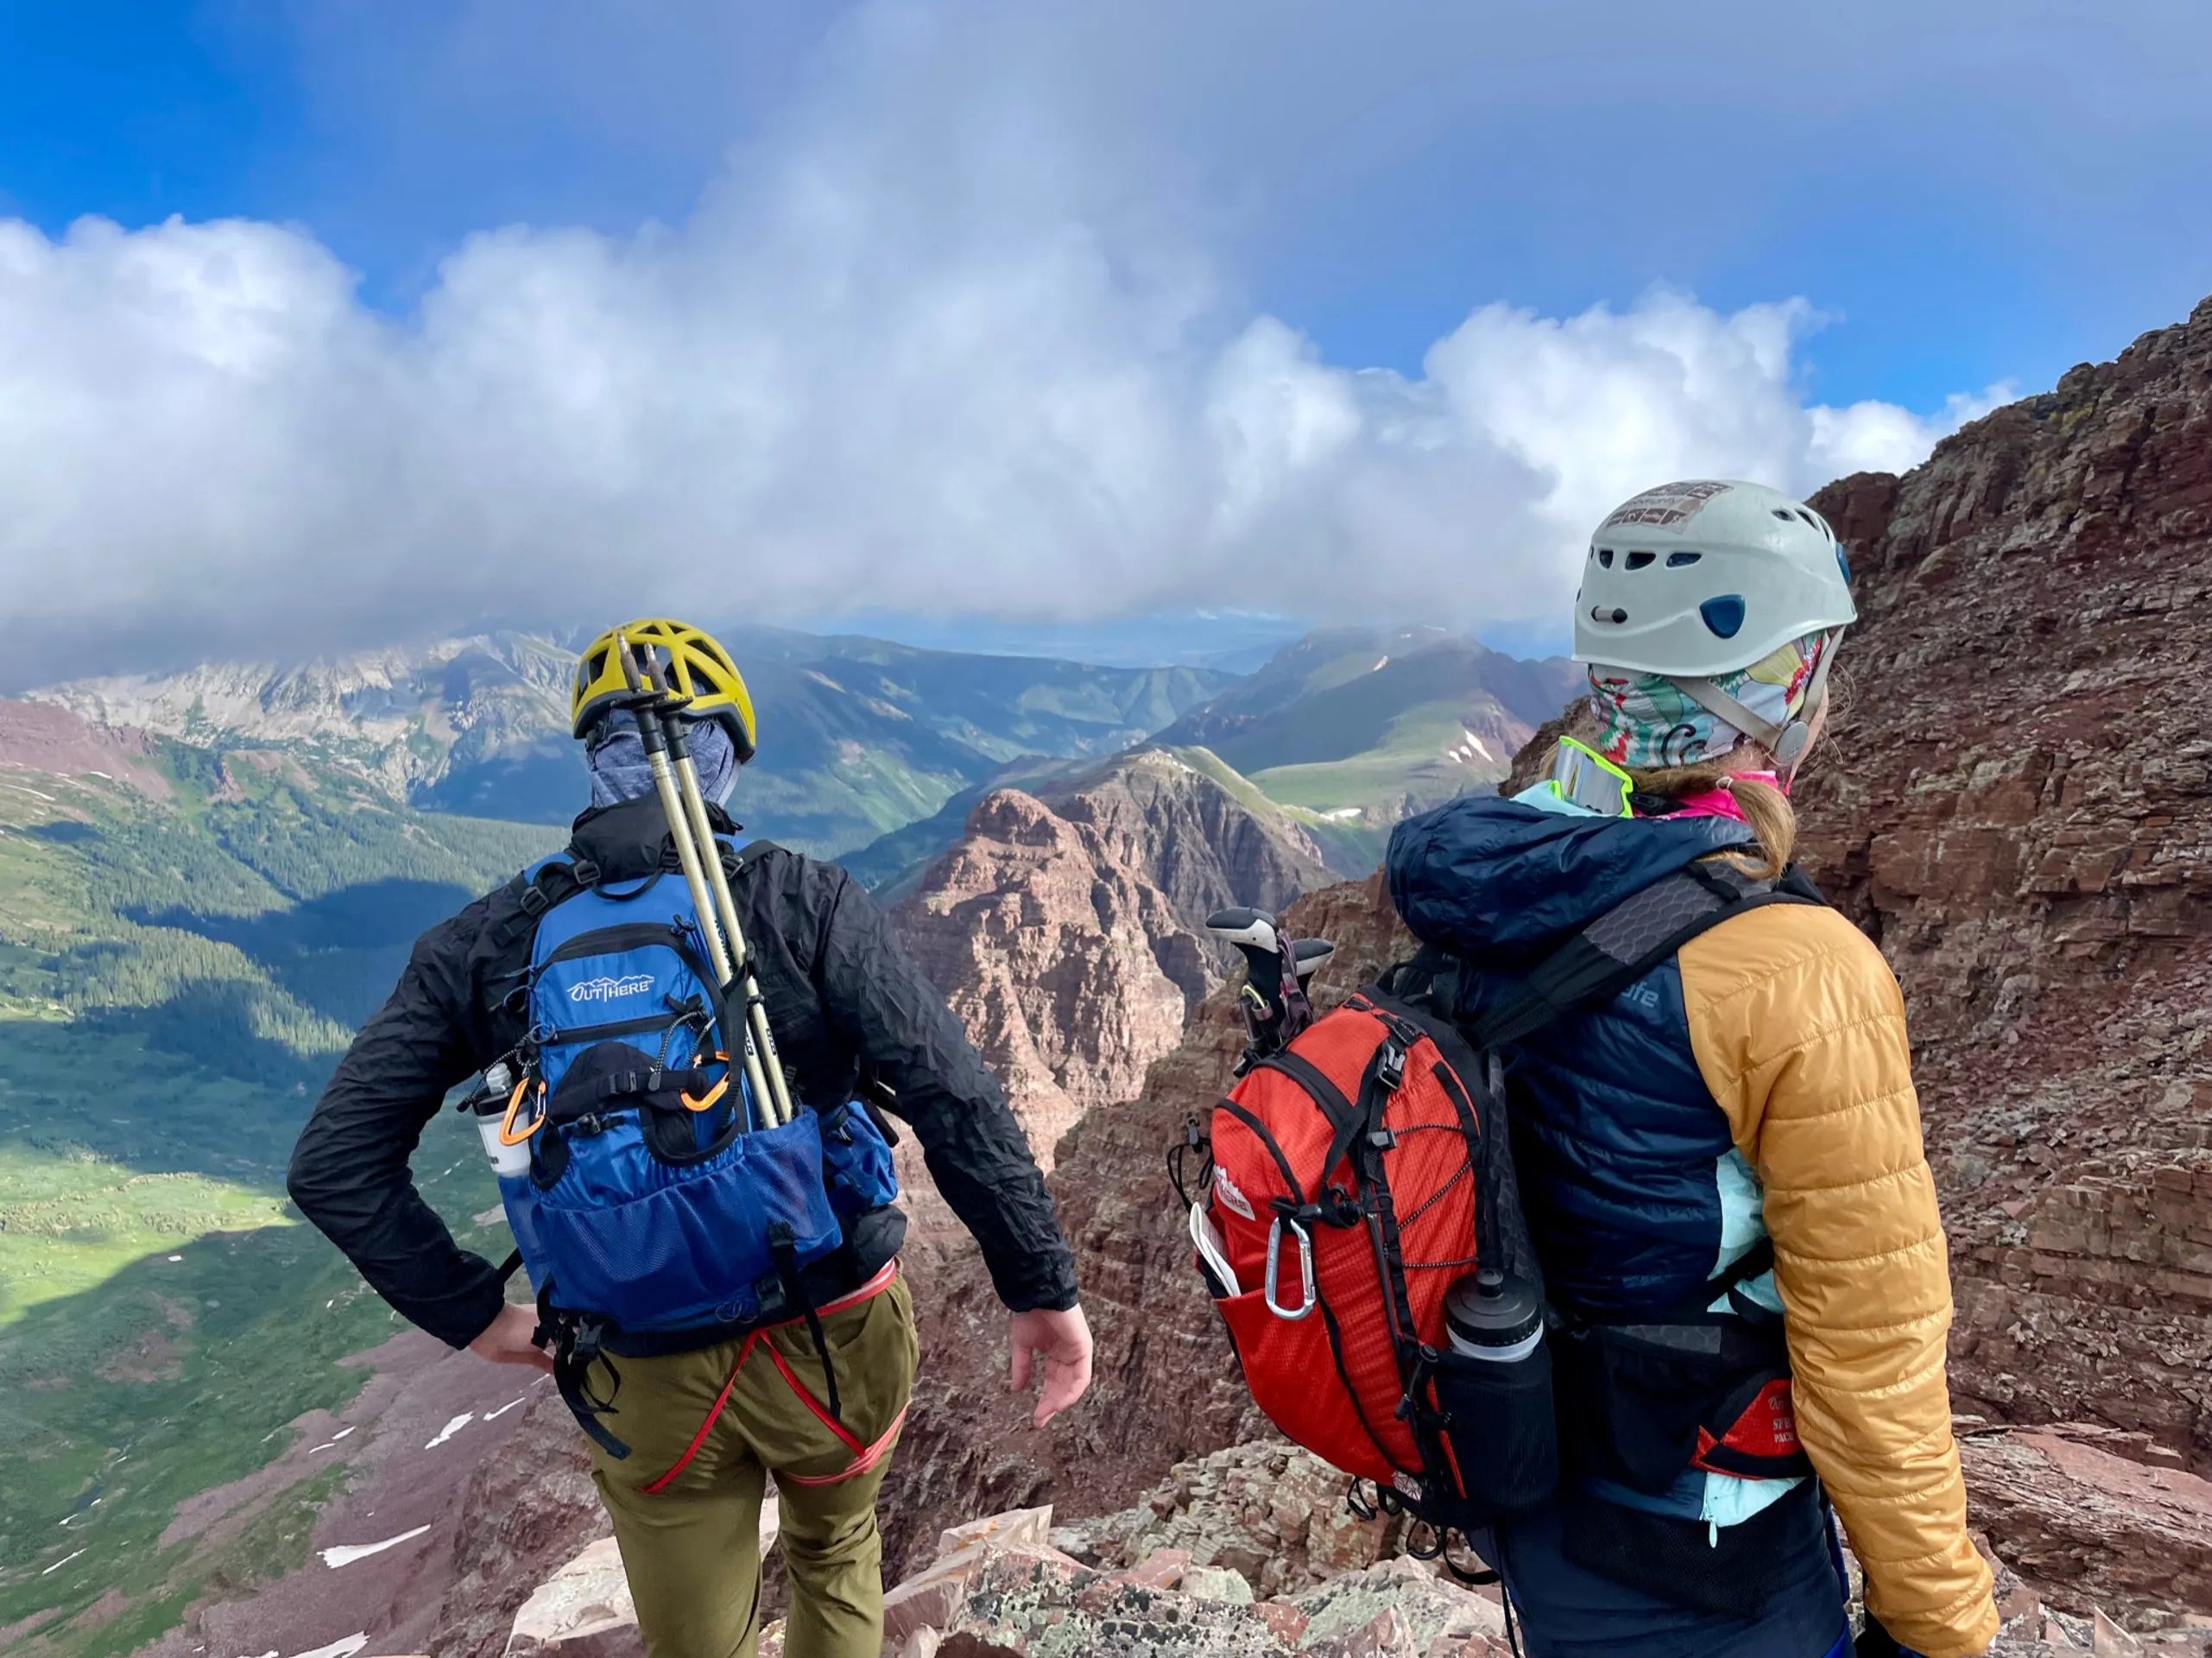 Backpackers wearing OutThere backpacks on a mountain